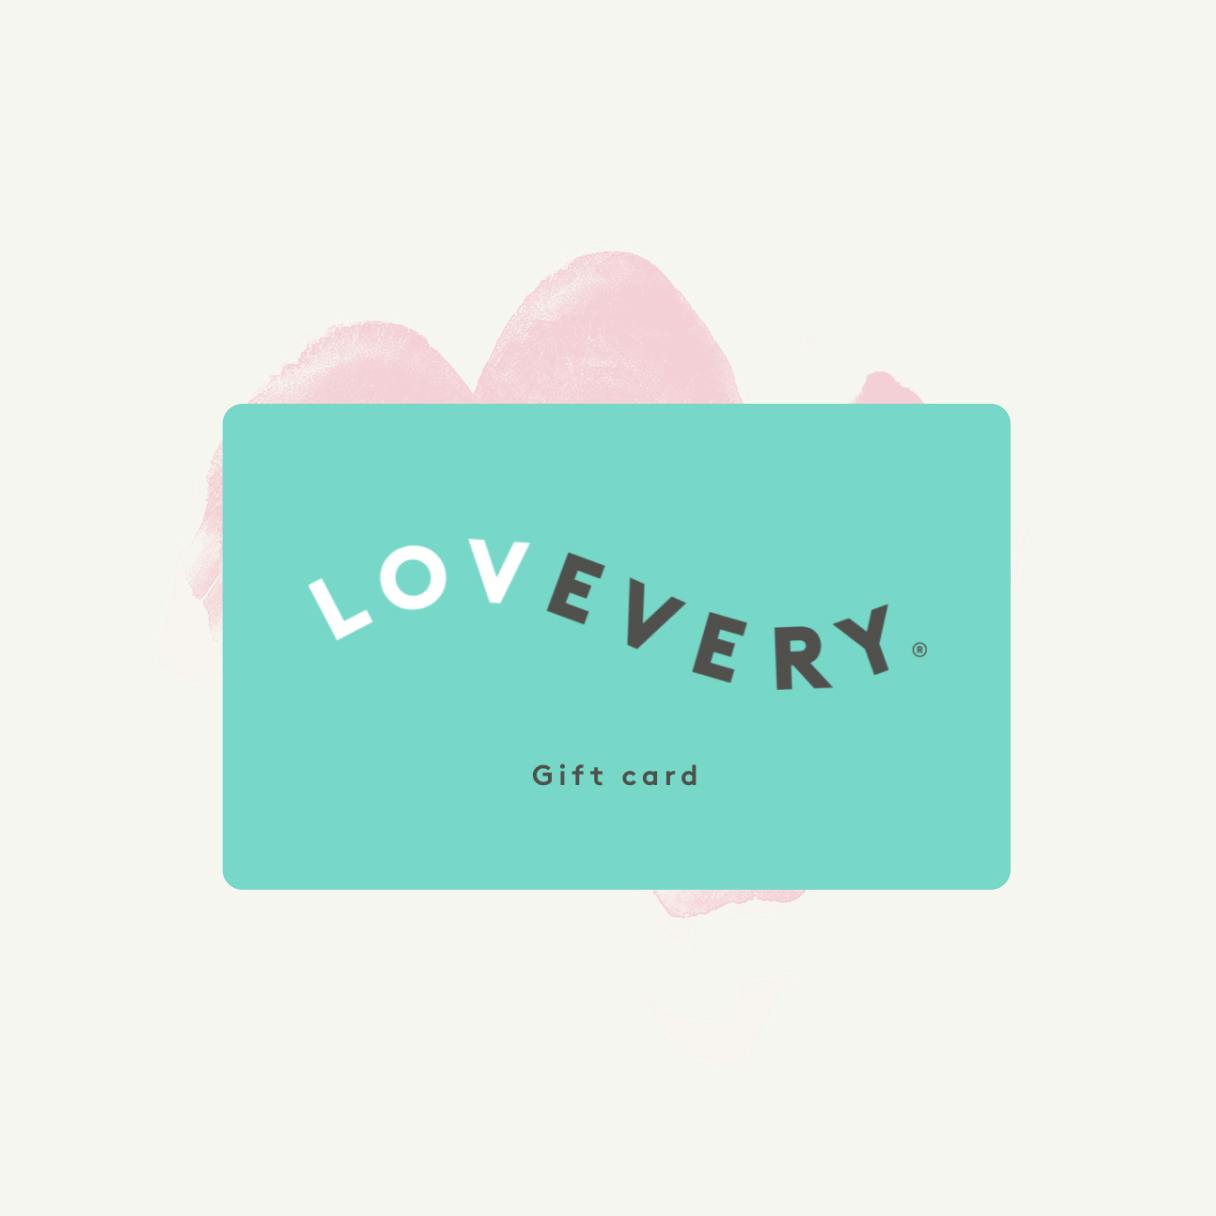 Gift Card Component (beige background)